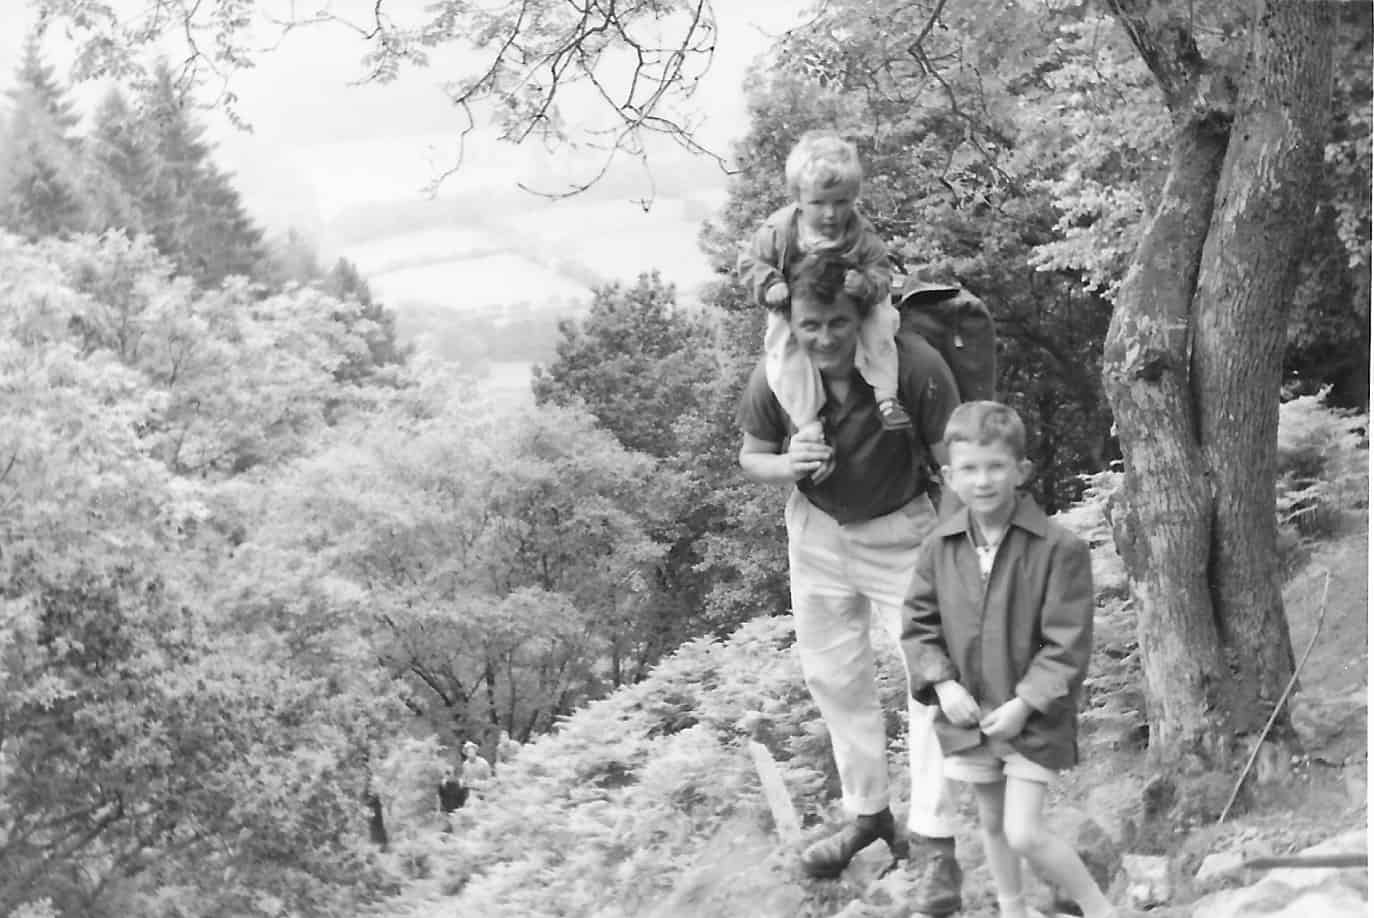 Julie on her Father's shoulders, climbing Cadair Idris in 1963.